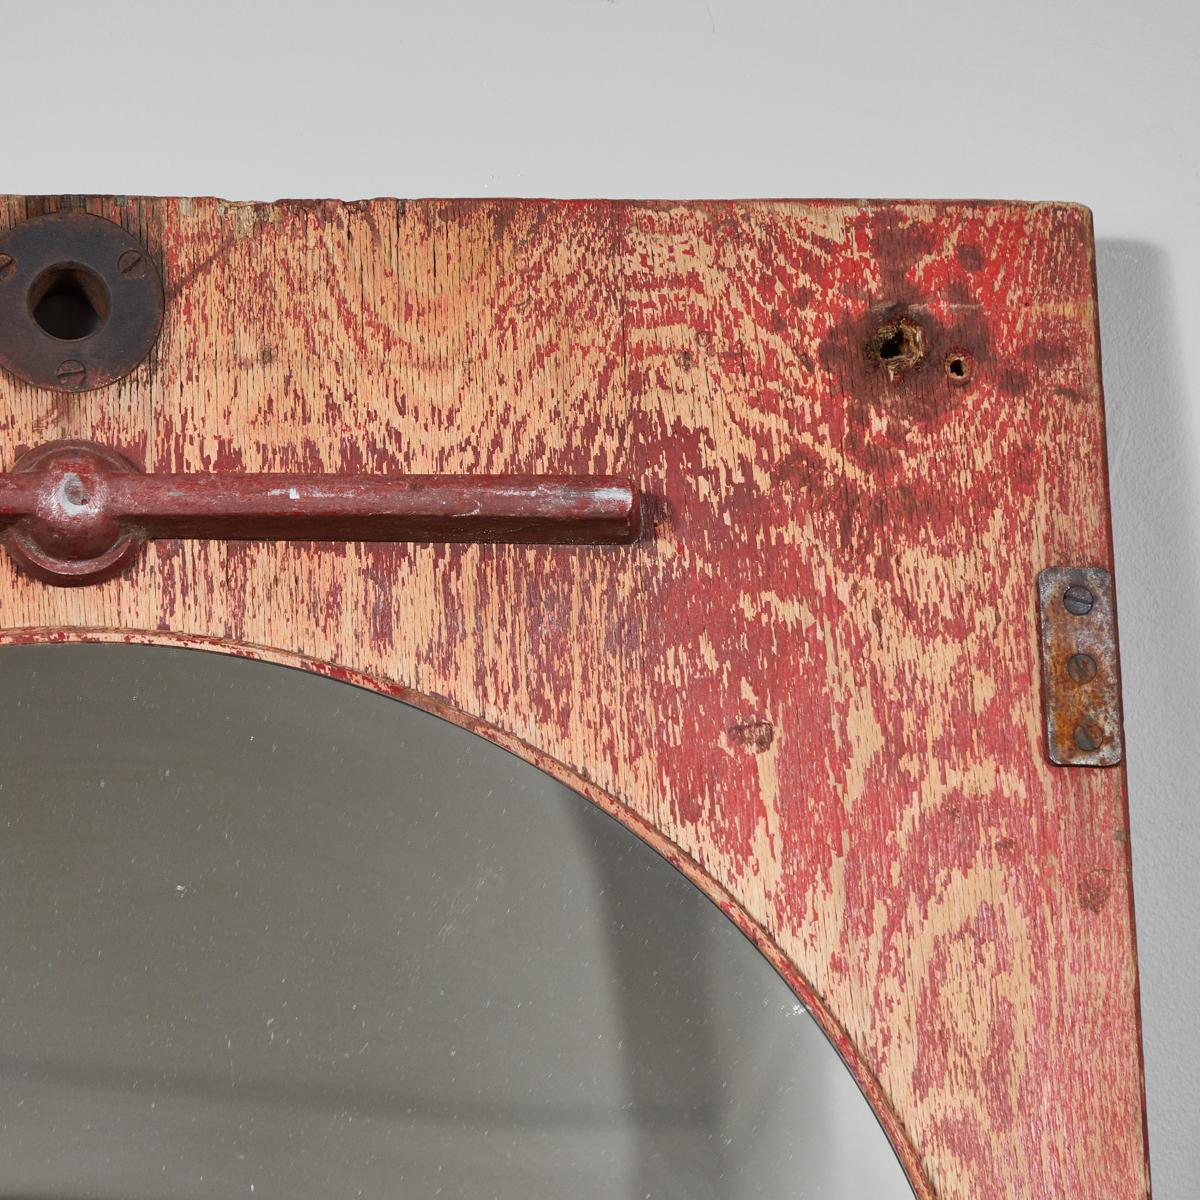 Circular mirror in a worn red industrial rectangular element.Originating in France dating to 1890.